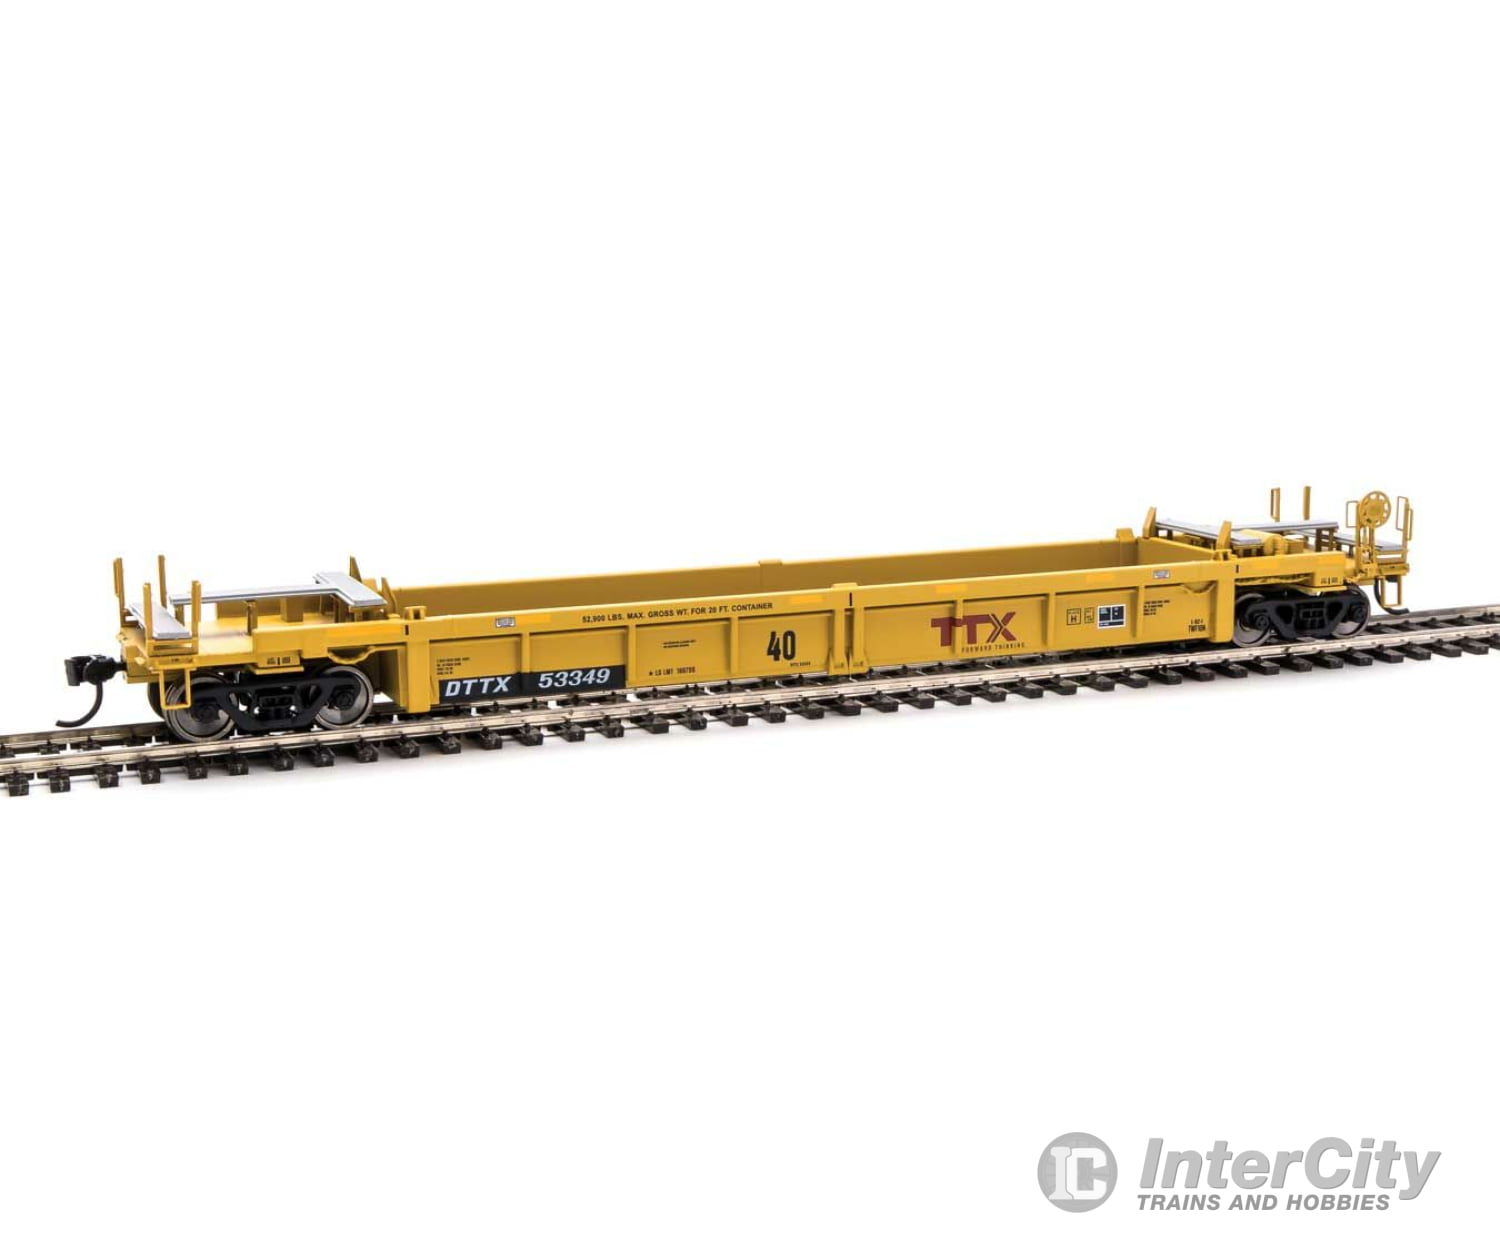 Walthers Mainline Ho 8419 Thrall Rebuilt 40 Well Car - Ready To Run -- Ttx Dttx #53349 (Yellow Black